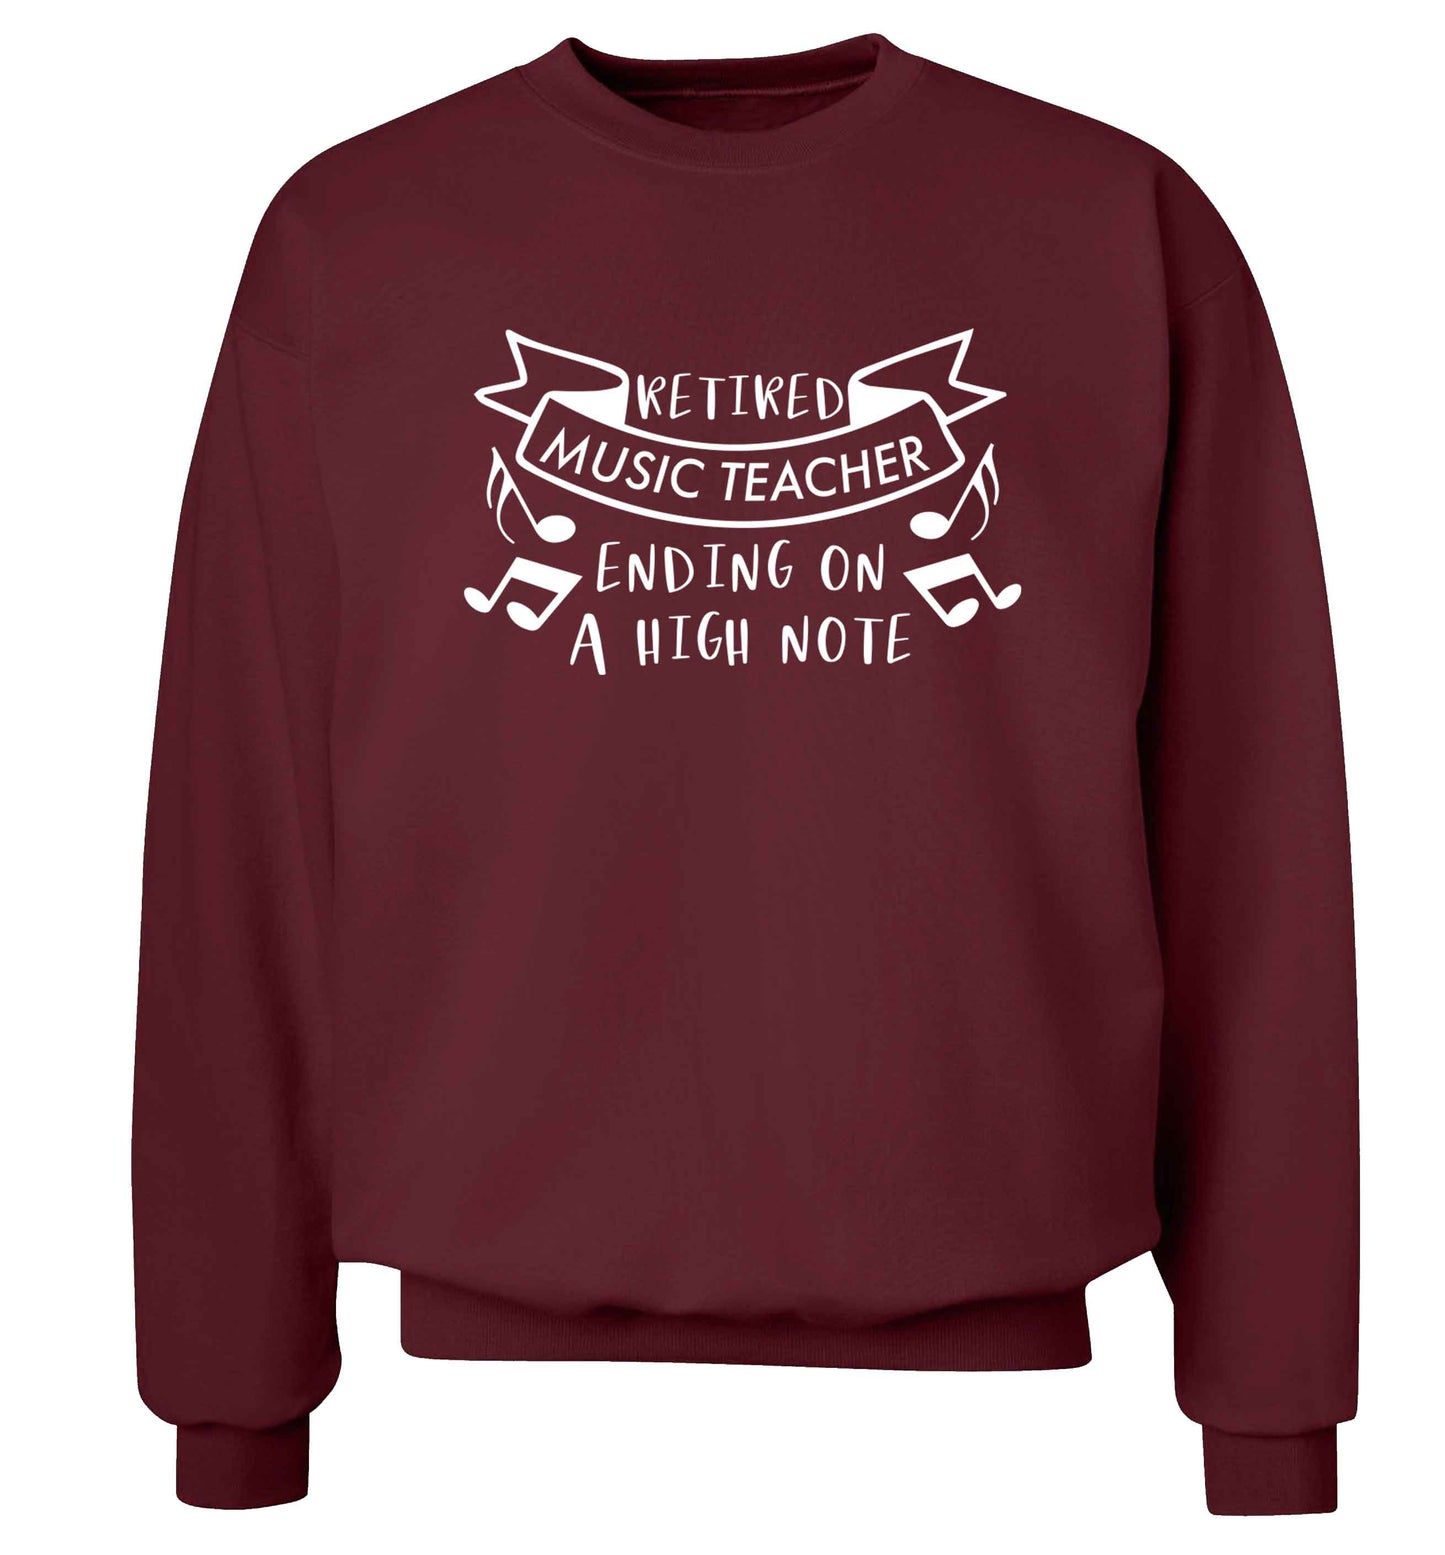 Retired music teacher ending on a high note Adult's unisex maroon Sweater 2XL